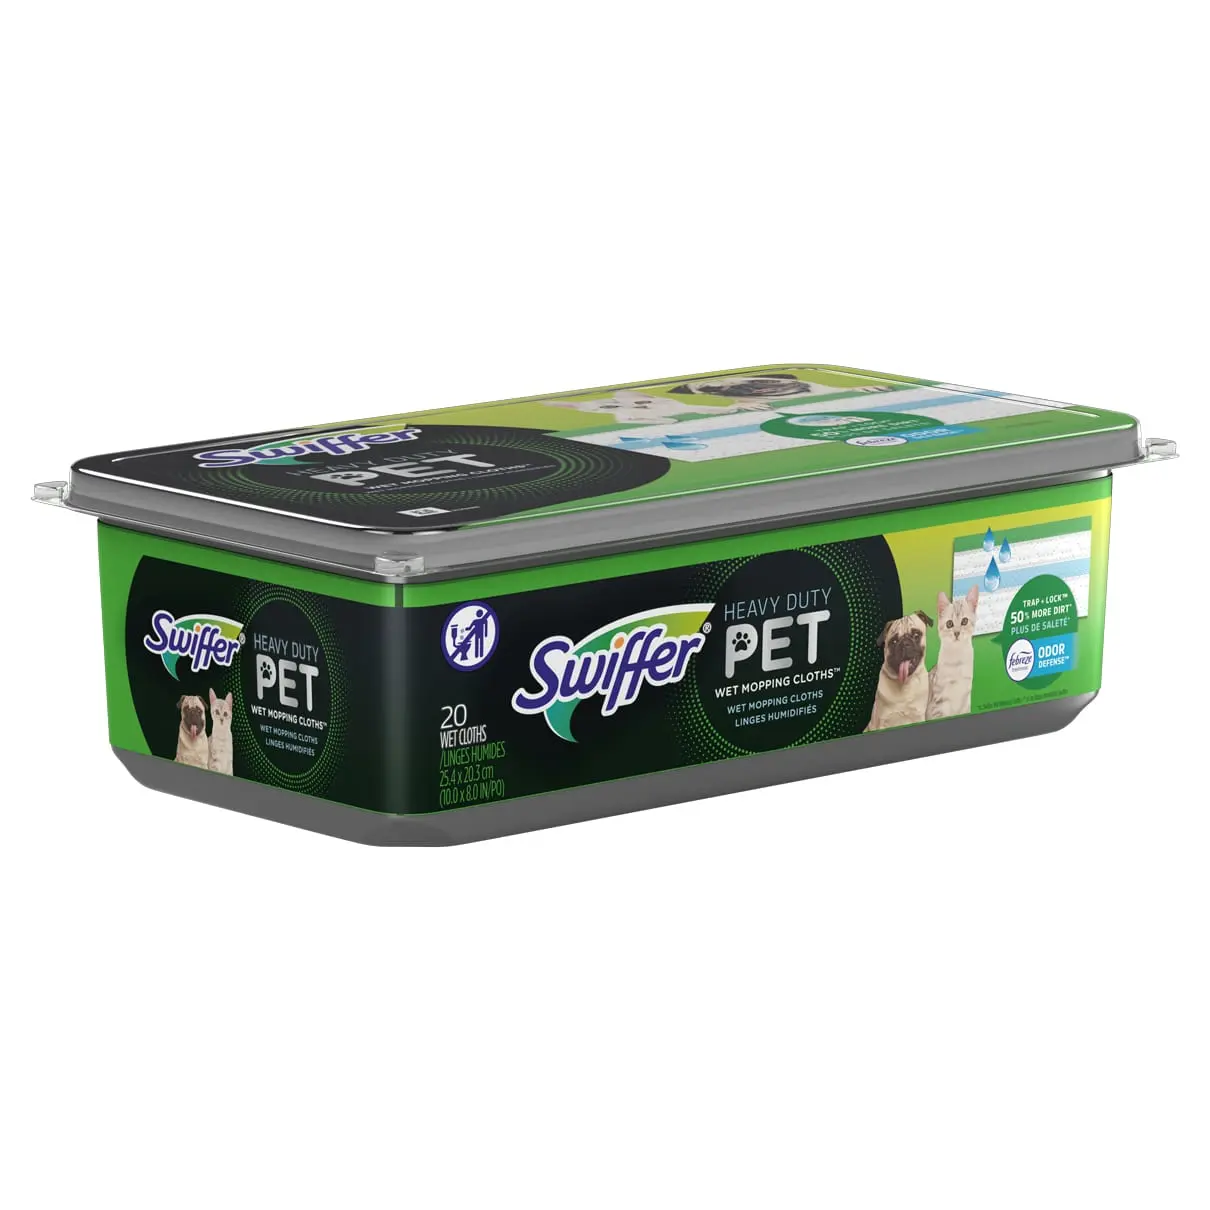 Swiffer® Sweeper™ Pet Heavy Duty Multi-Surface Wet Cloth Refills for Floor Mopping and Cleaning